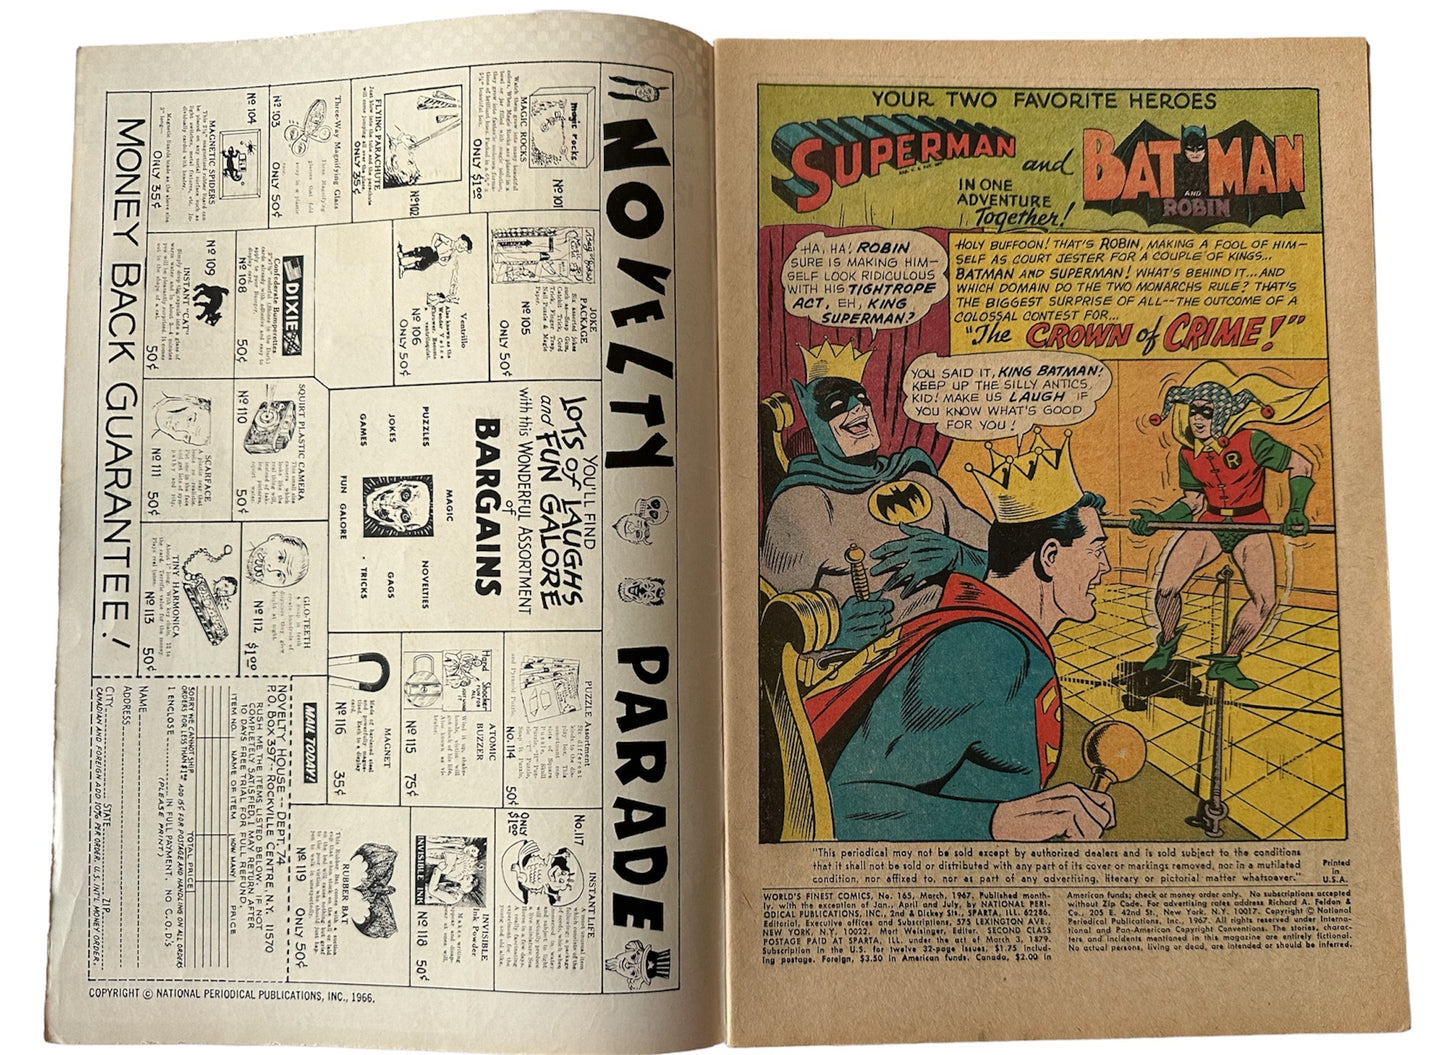 Vintage 1967 DC Worlds Finest Comics Issue Number 165 - Starring SuperMan And BatMan & Robin In The Crown Of Crime - Former Shop Stock